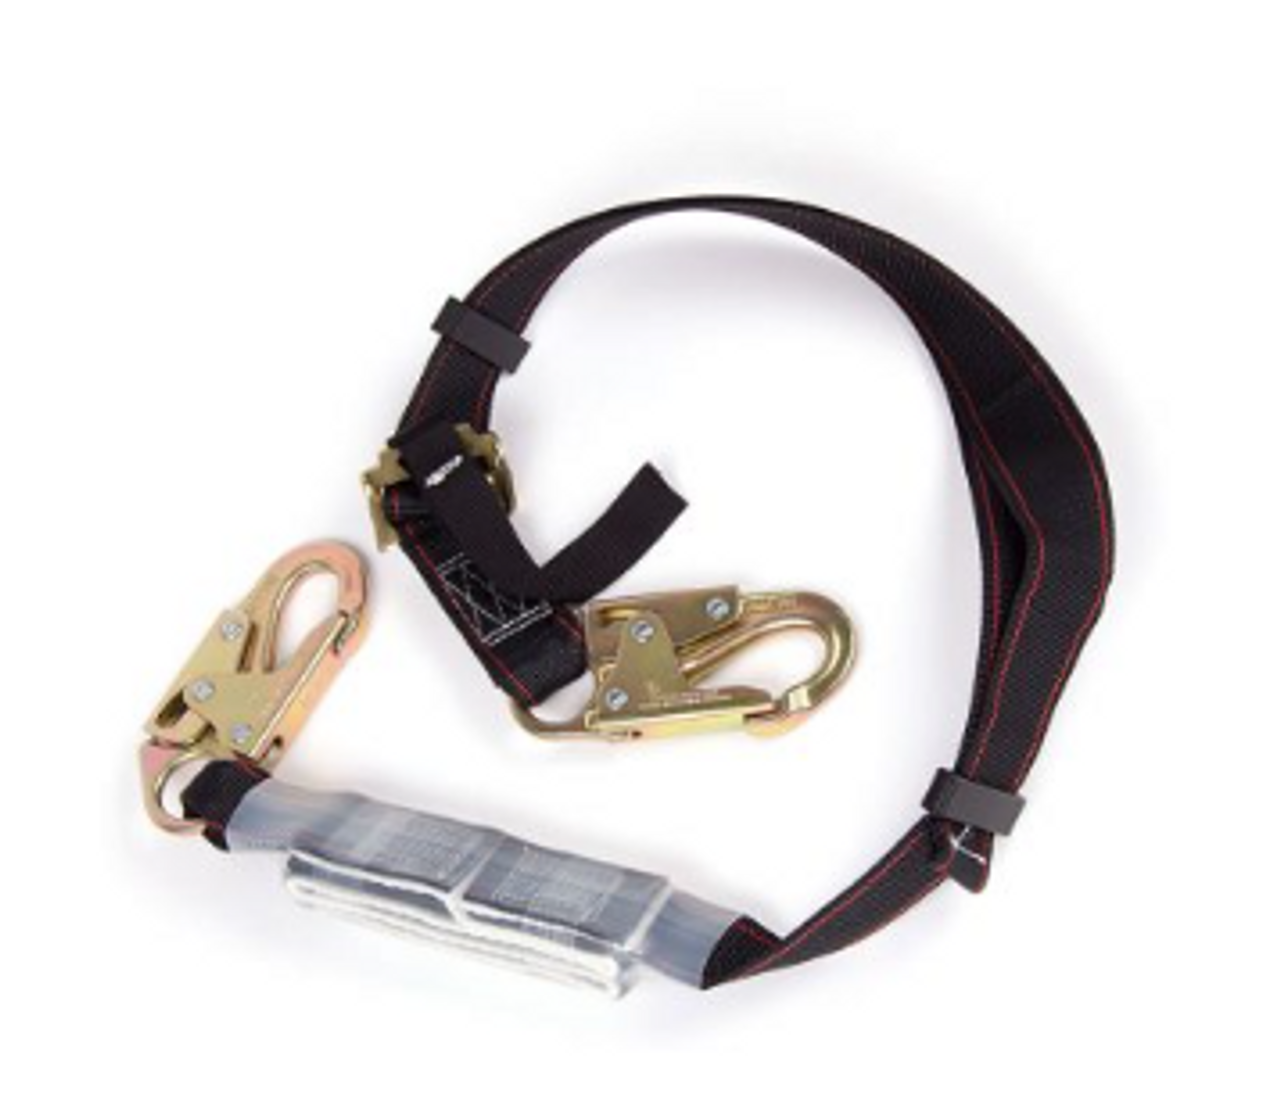 Material: Polyester & steel (Snap hook)
Snap hook opening: 21mm (0.78’’)
Length: 1.22m to 1.52m (4’ to 6’)
Shock absorber: E4 (45kg – 115kg), (100lb – 254lb)
Standards: CSA Z259 11